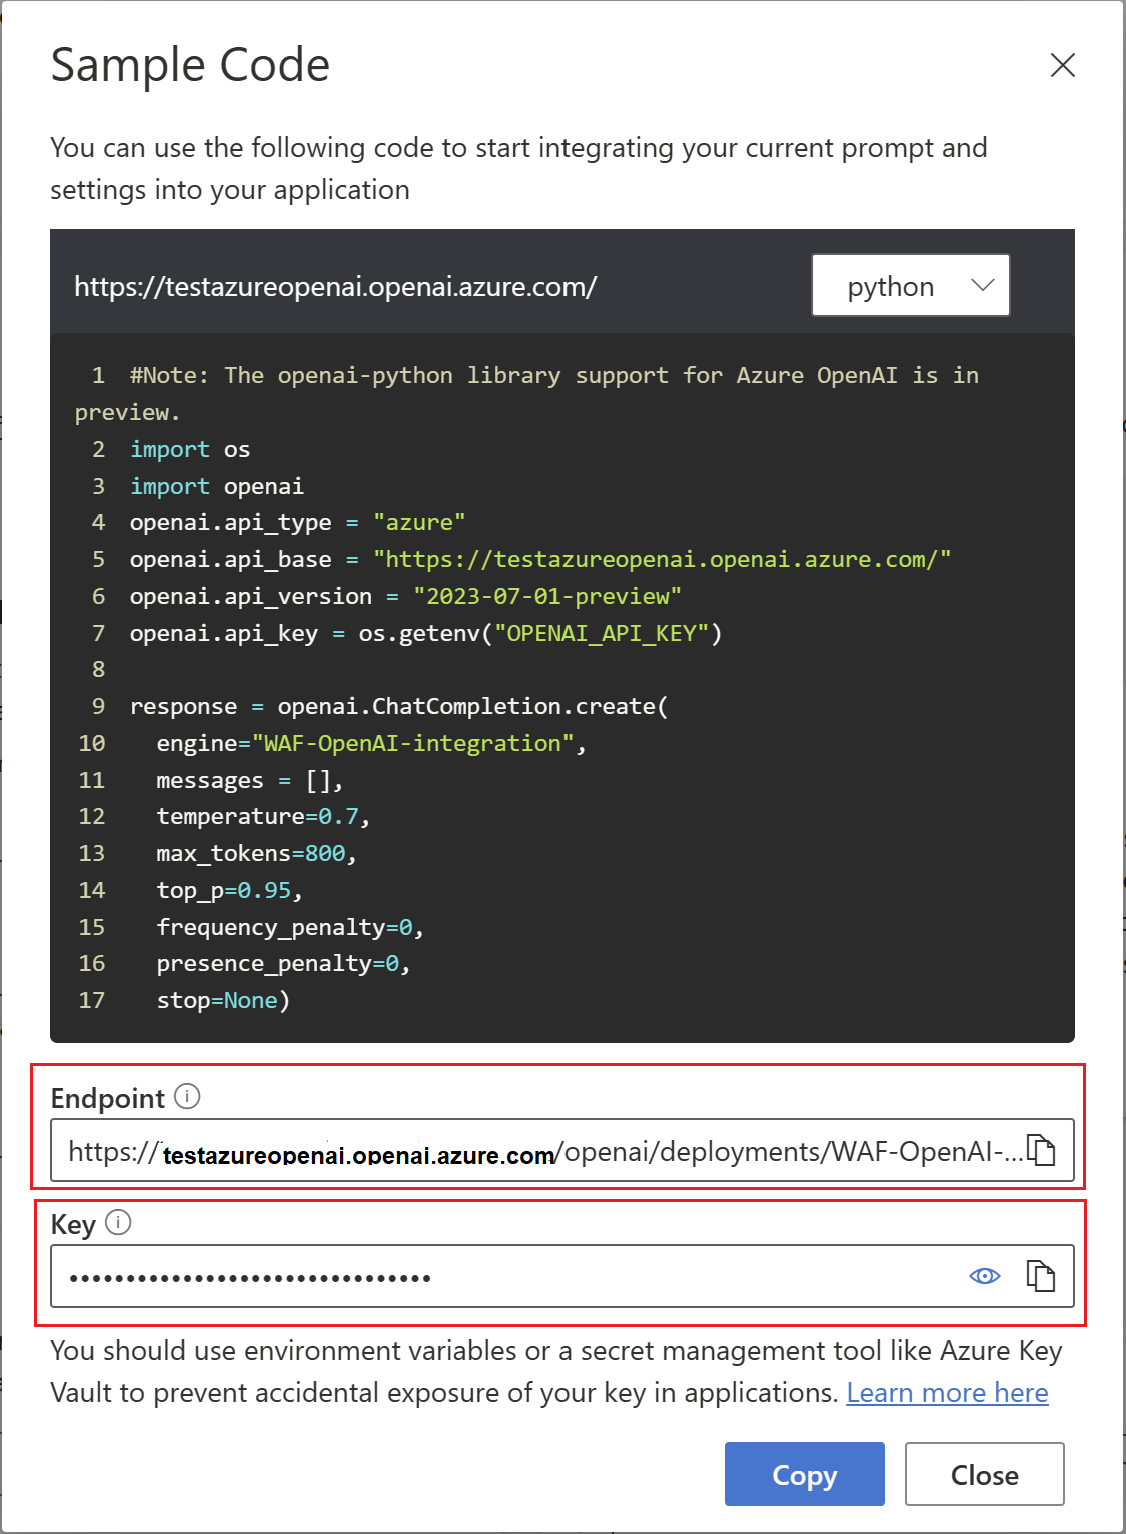 Screenshot showing Azure OpenAI sample code with Endpoint and Key.